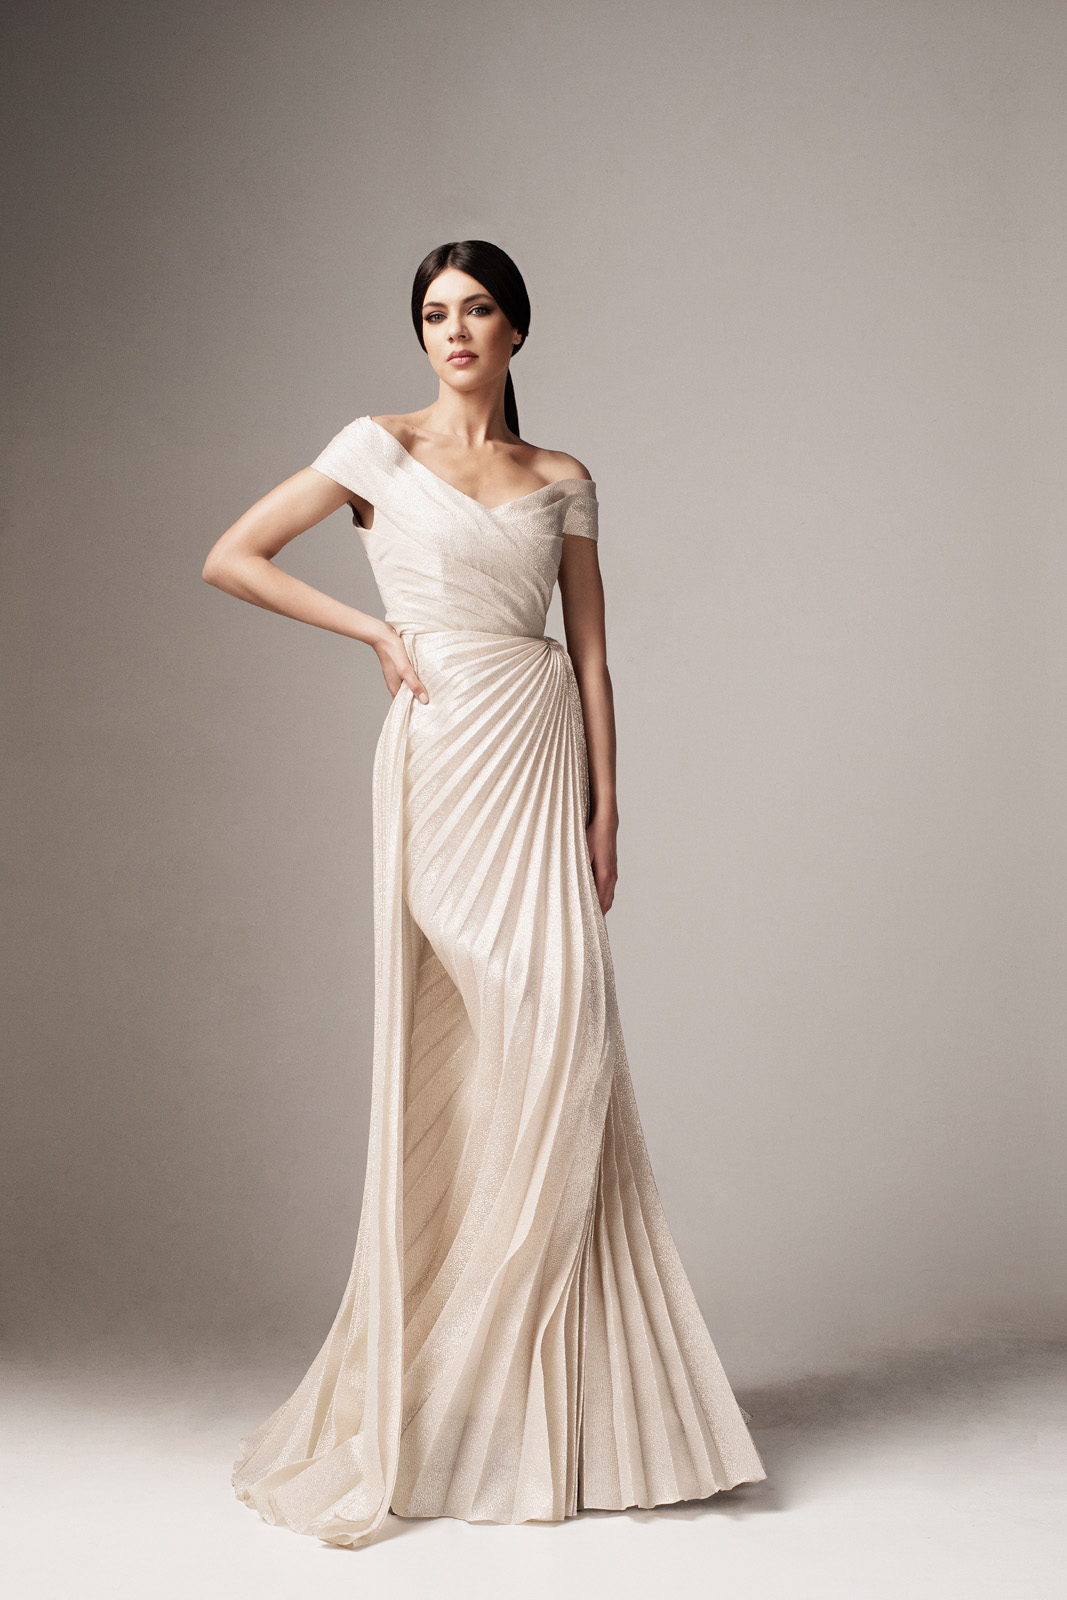 Mermaid style dress made of shiny gold material with v-neckline on the shoulders - Ana Radu